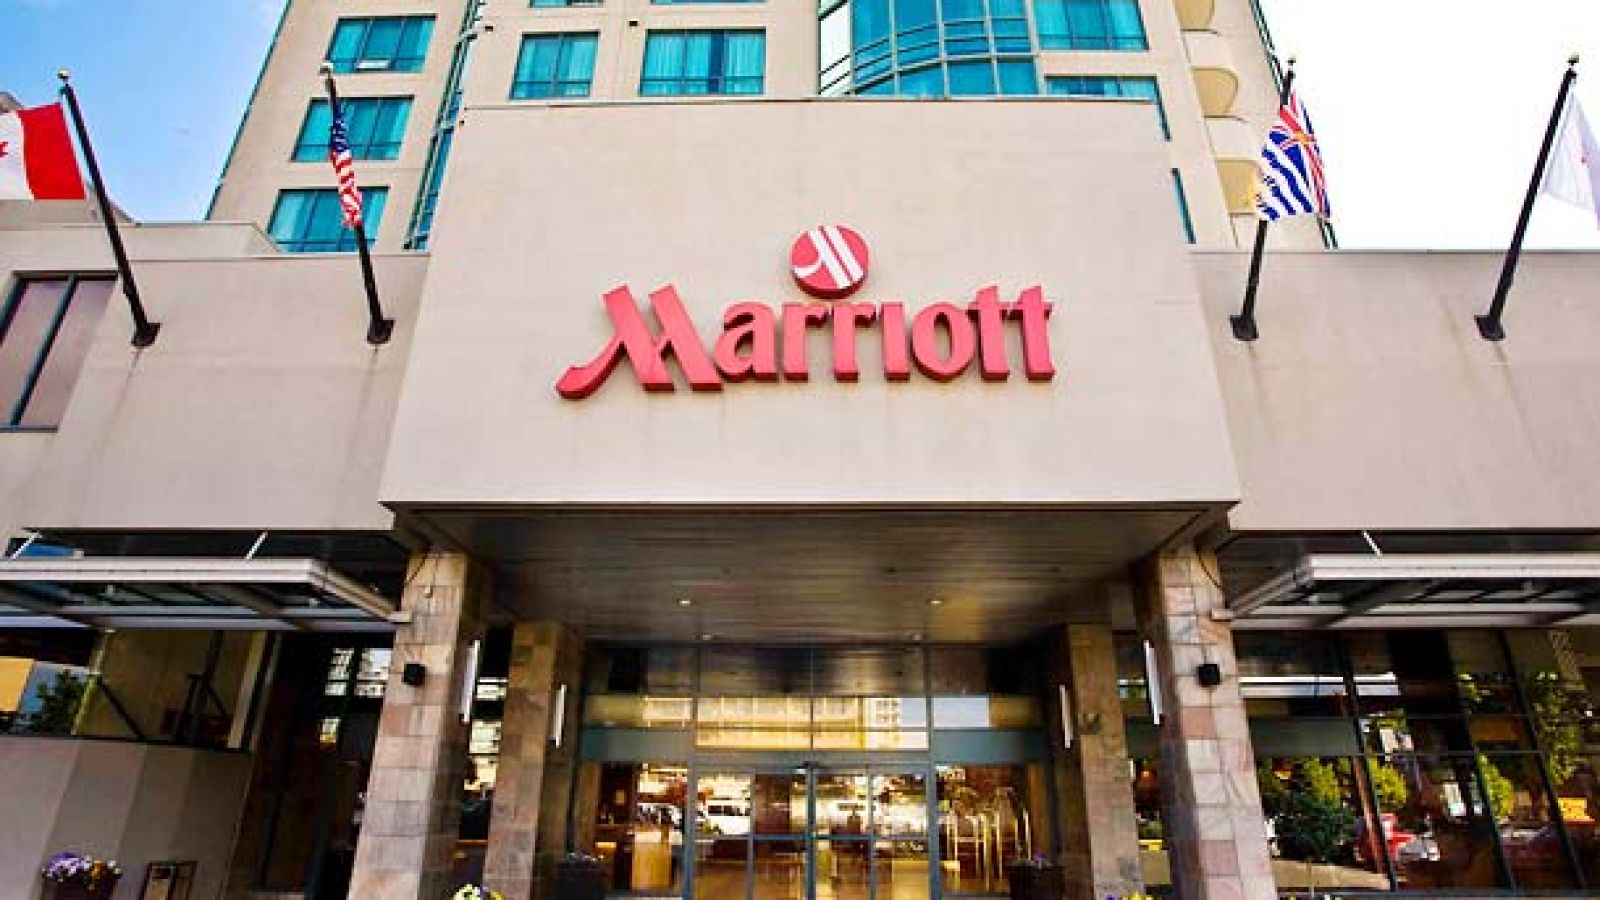 Vancouver Airport Marriott Hotel - Front View